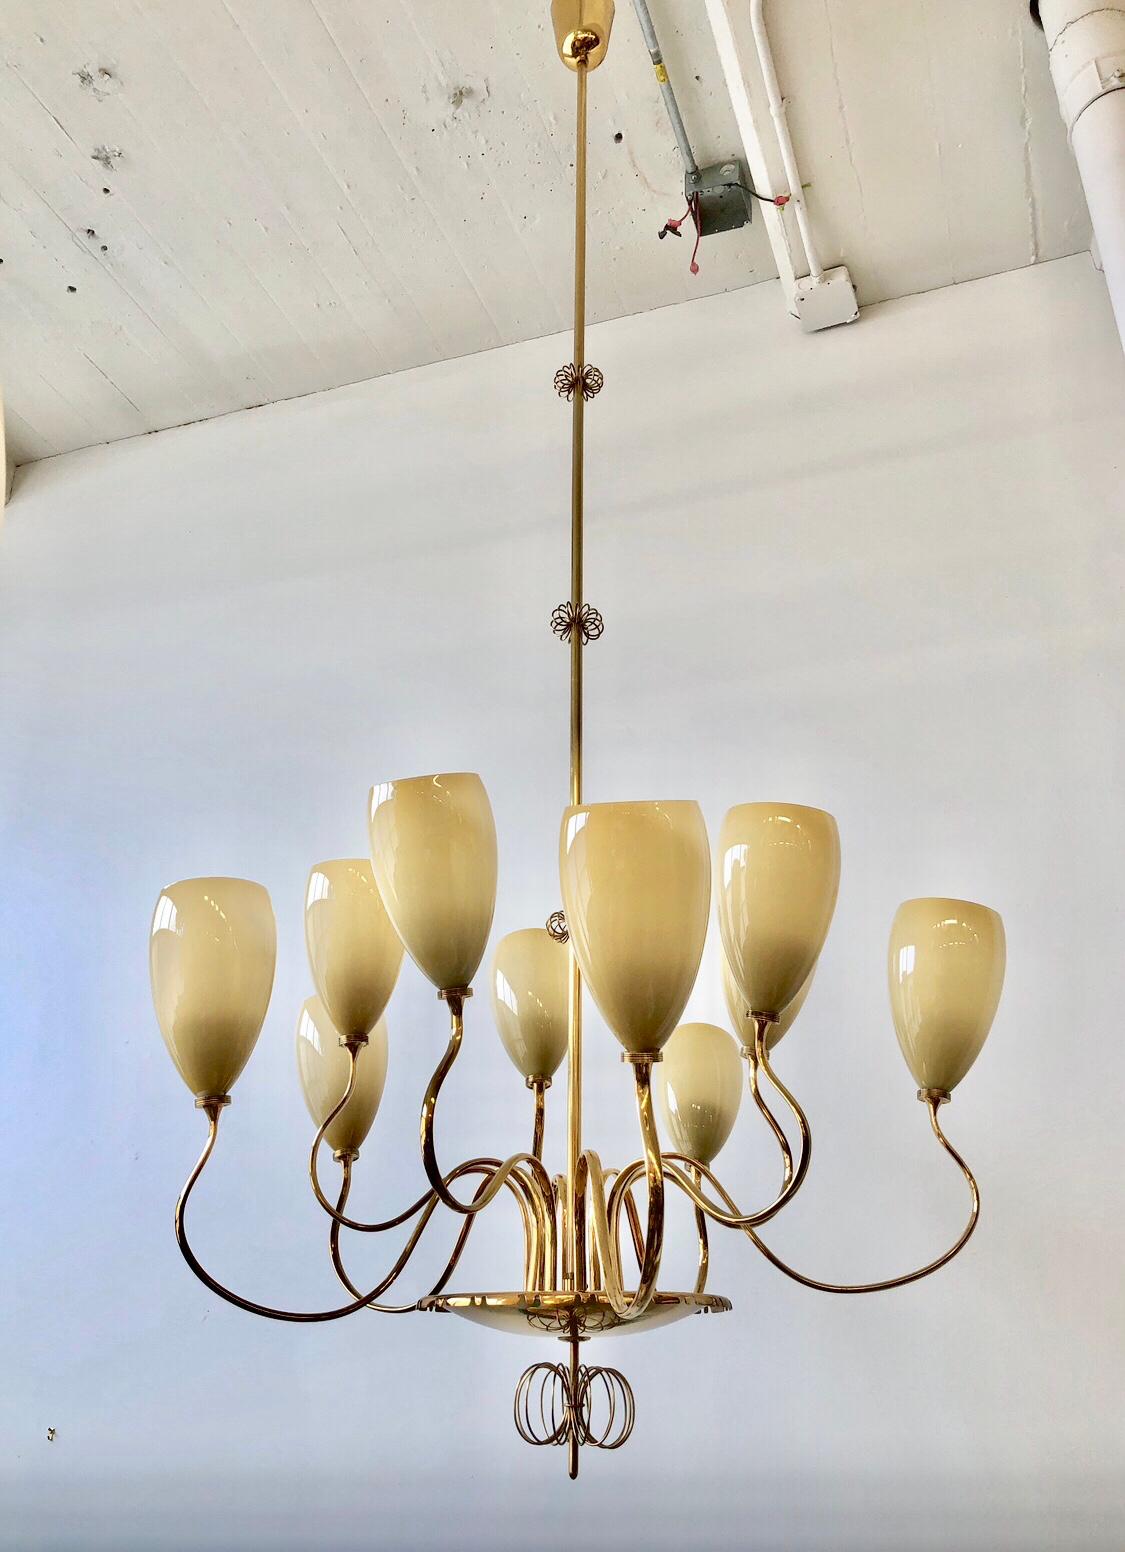 Large, 10 Lights Chandelier designed by Paavo Tynell for Idman Oy, Finland, circa 1950th.
Polished brass with opaline glass shades. Similar example is featured at Idman Oy Catalogue.
Diameter 32? , Height 70? ( can be adjusted).
Two Chandeliers